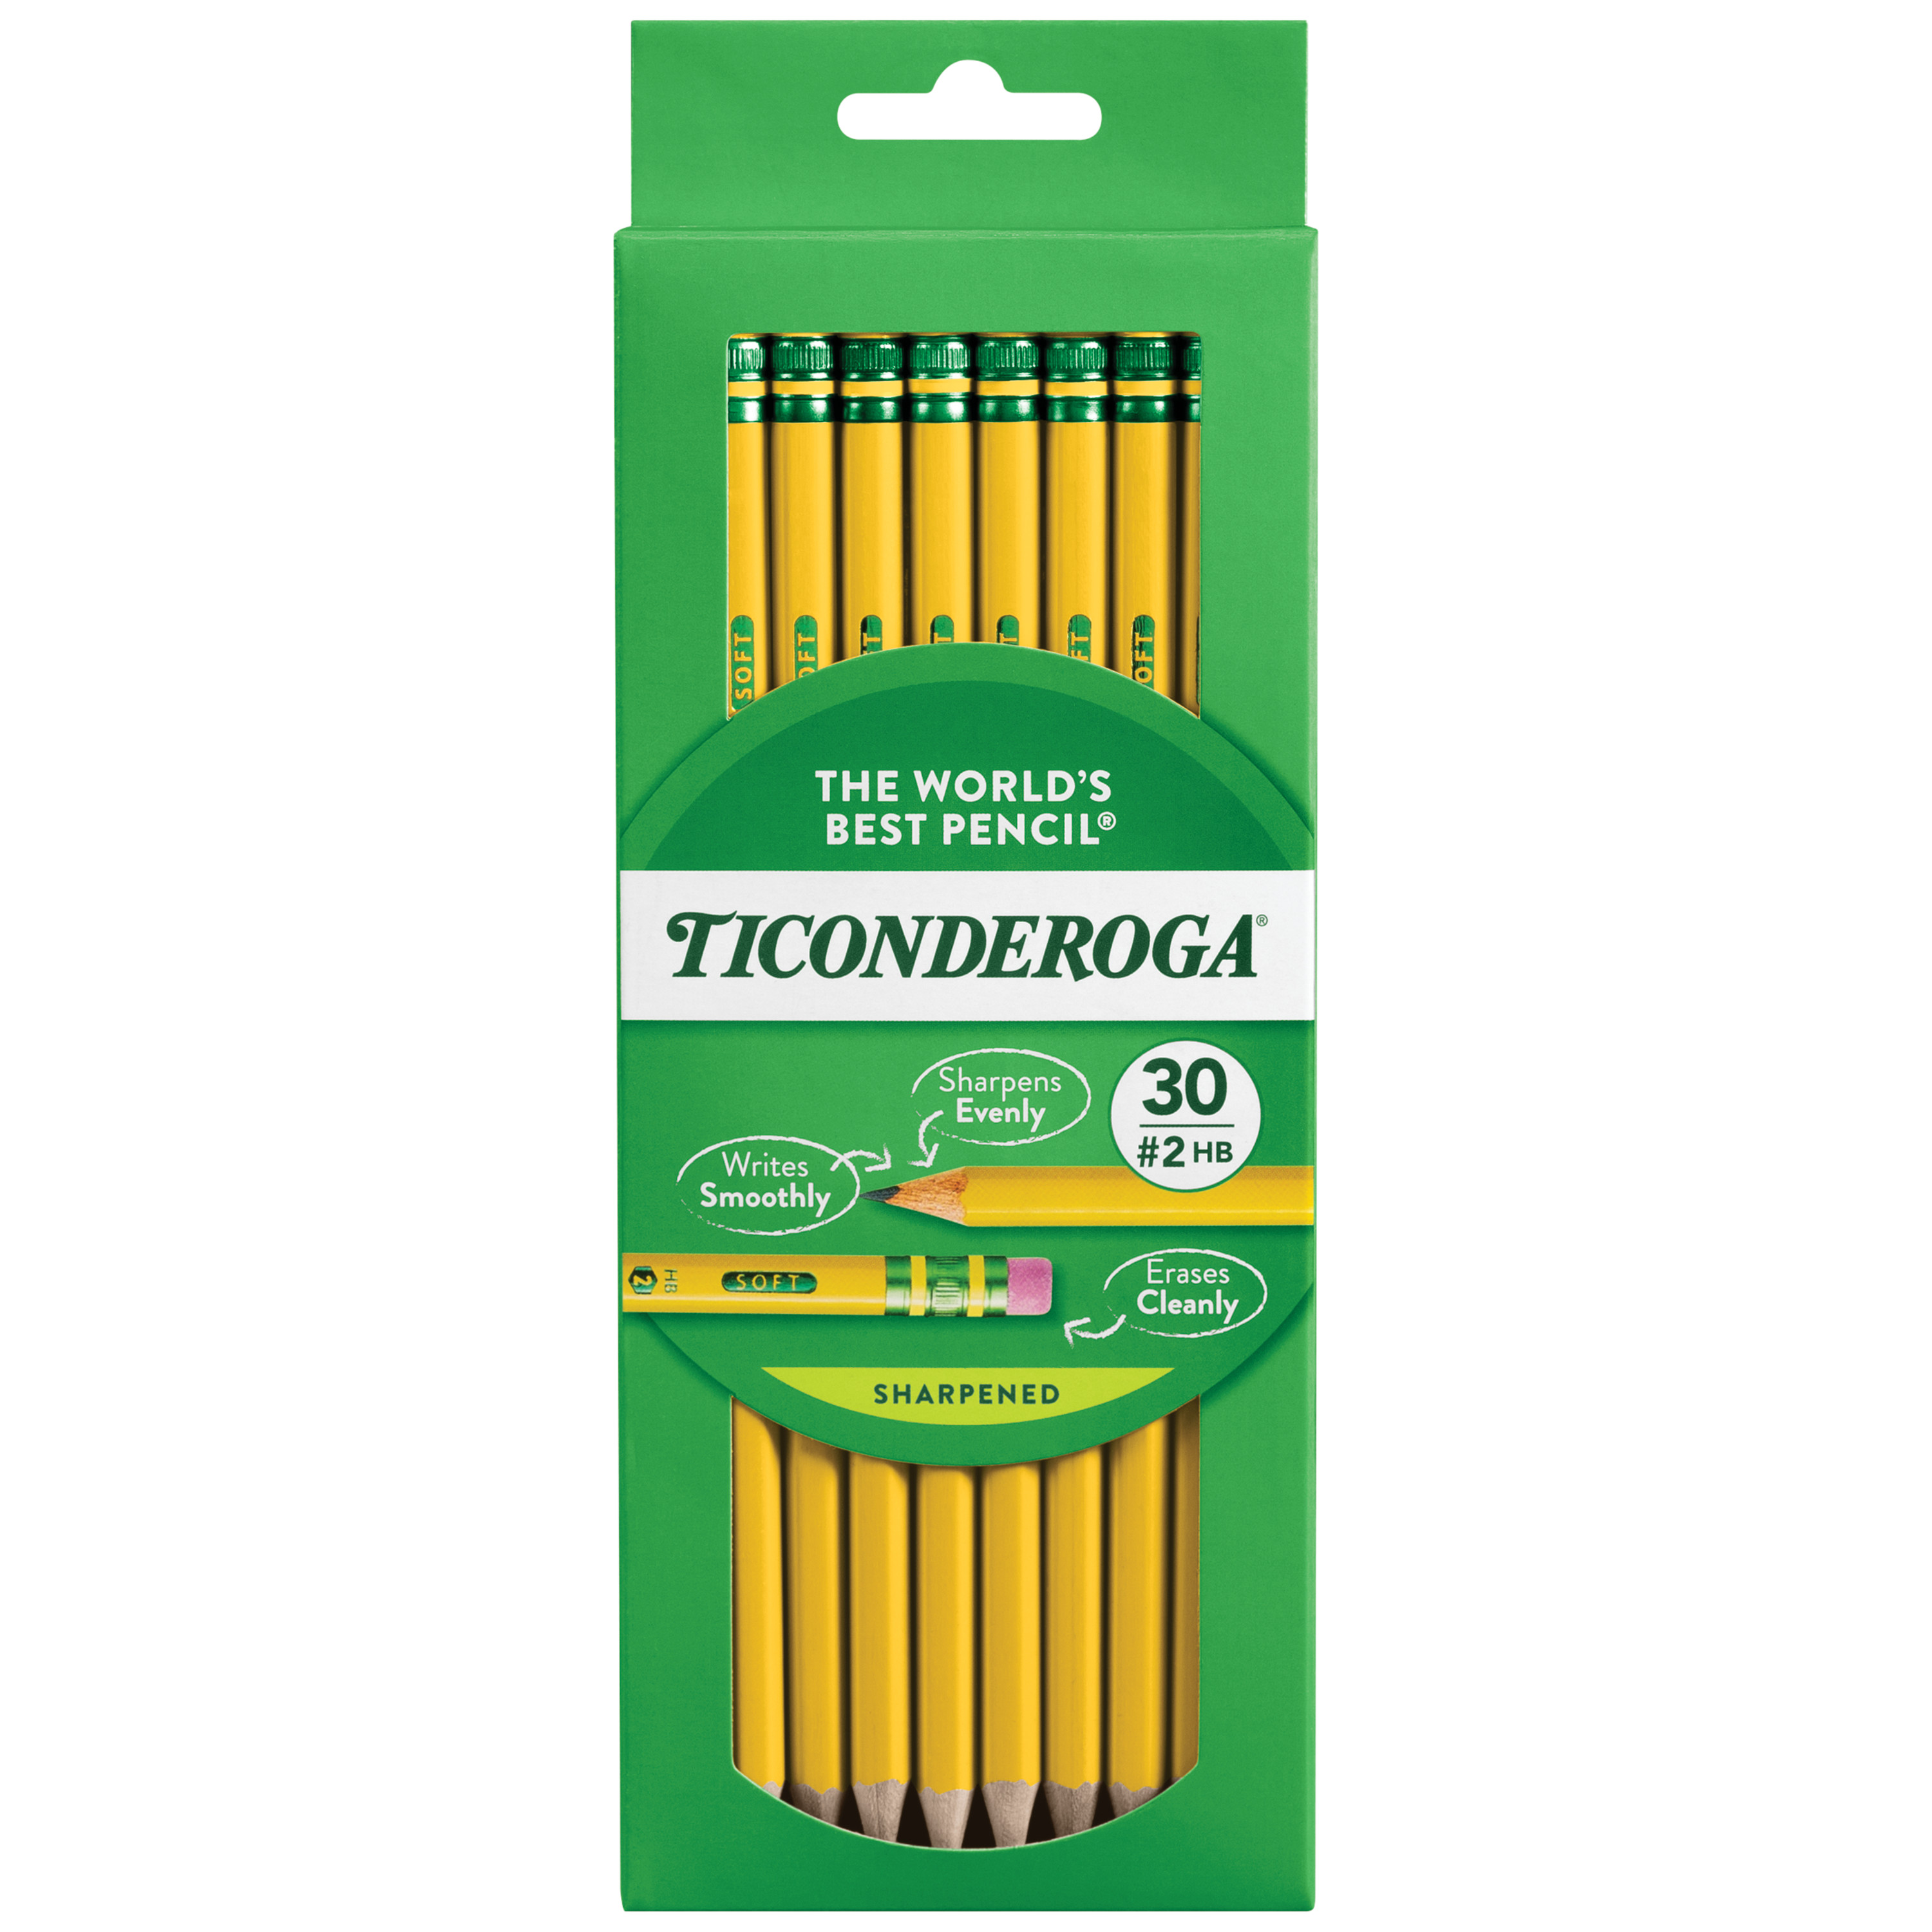 Ticonderoga Wood-Cased Pencils, Pre-Sharpened, #2 HB Soft, Yellow, 30 Count - image 1 of 6